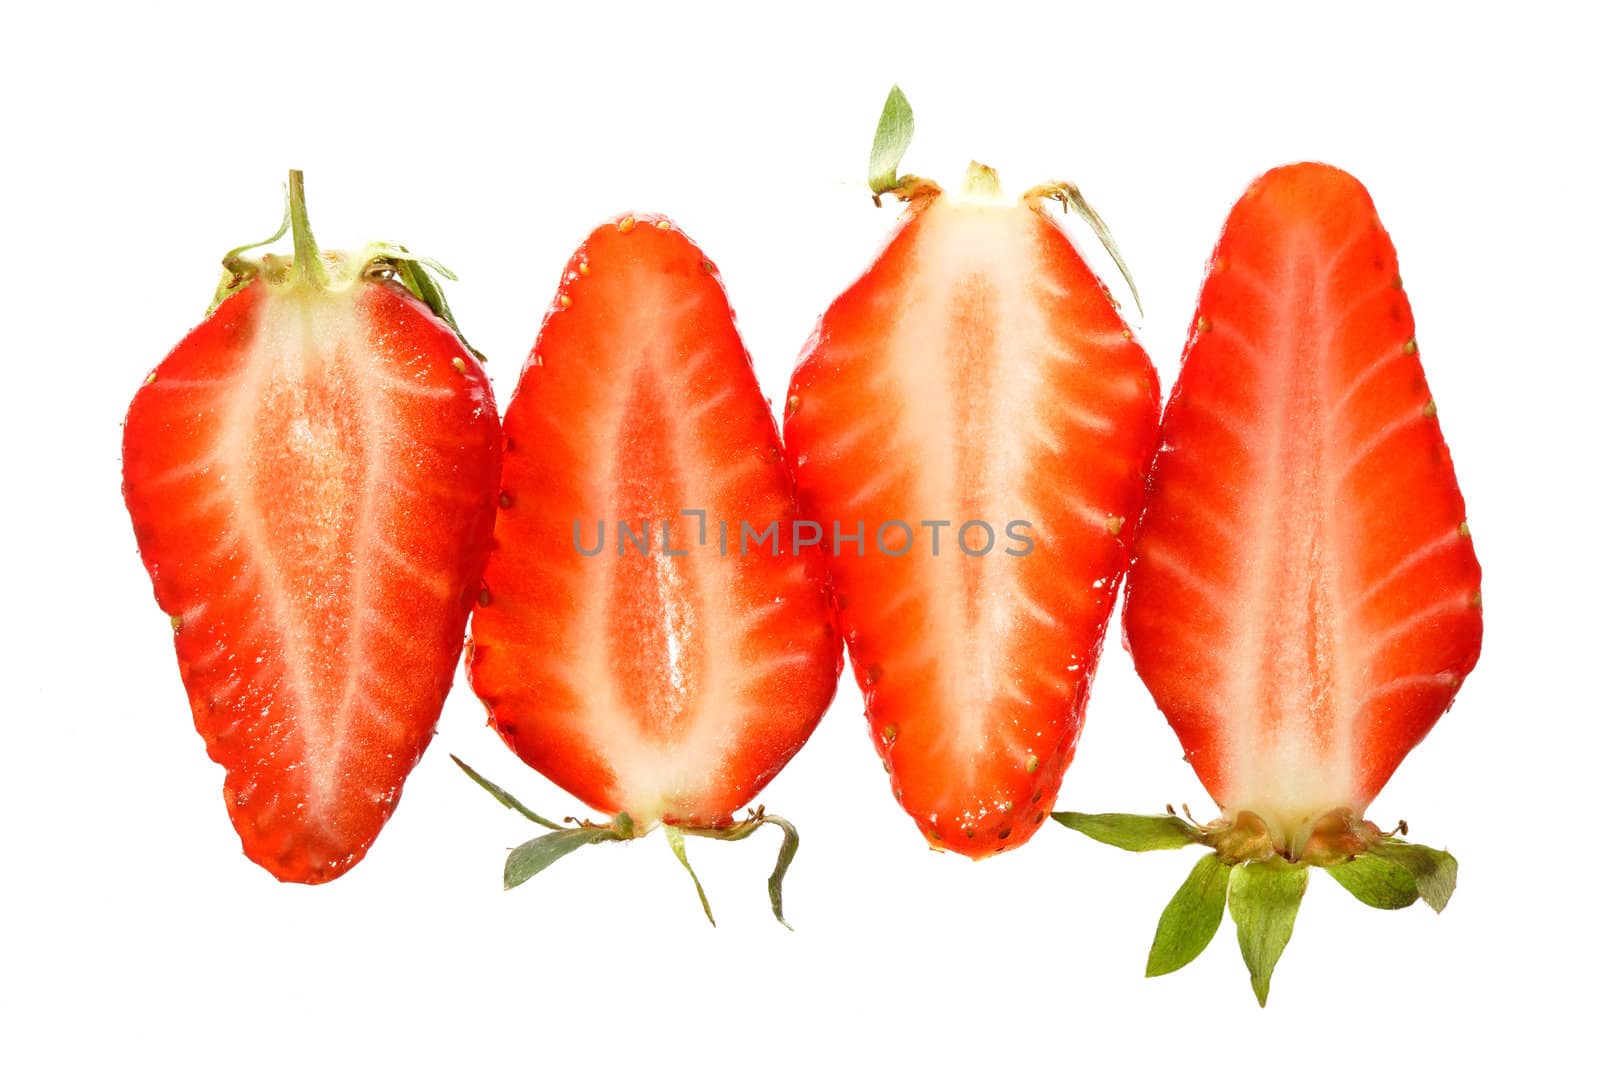 Sliced strawberries by ecobo